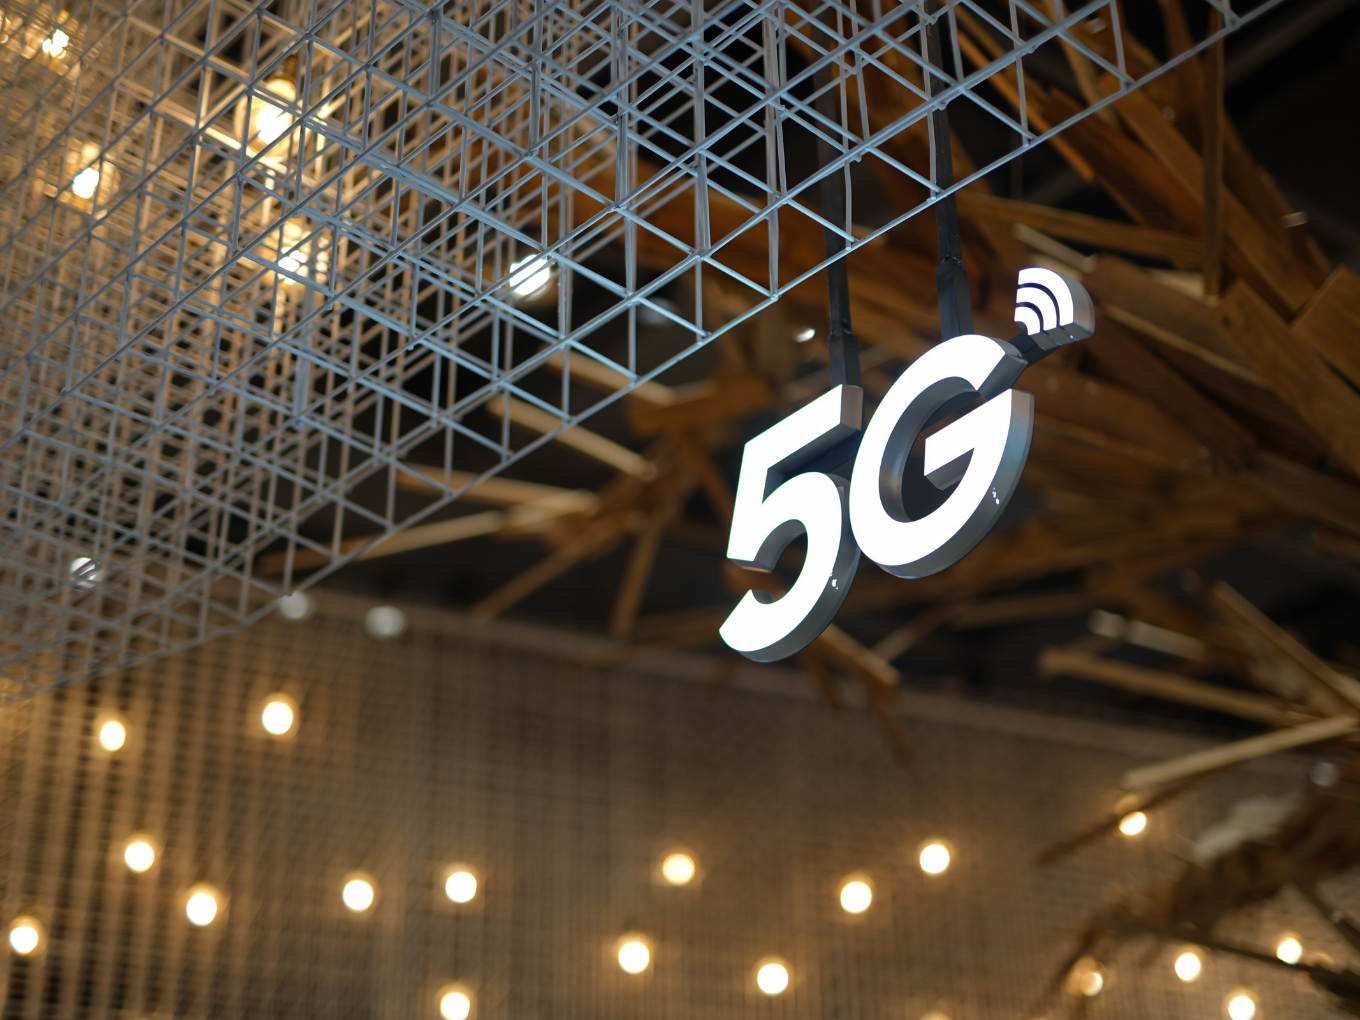 Parliamentary Panel Rebukes Govt Over Delay In 5G Rollout & Higher Spectrum Pricing